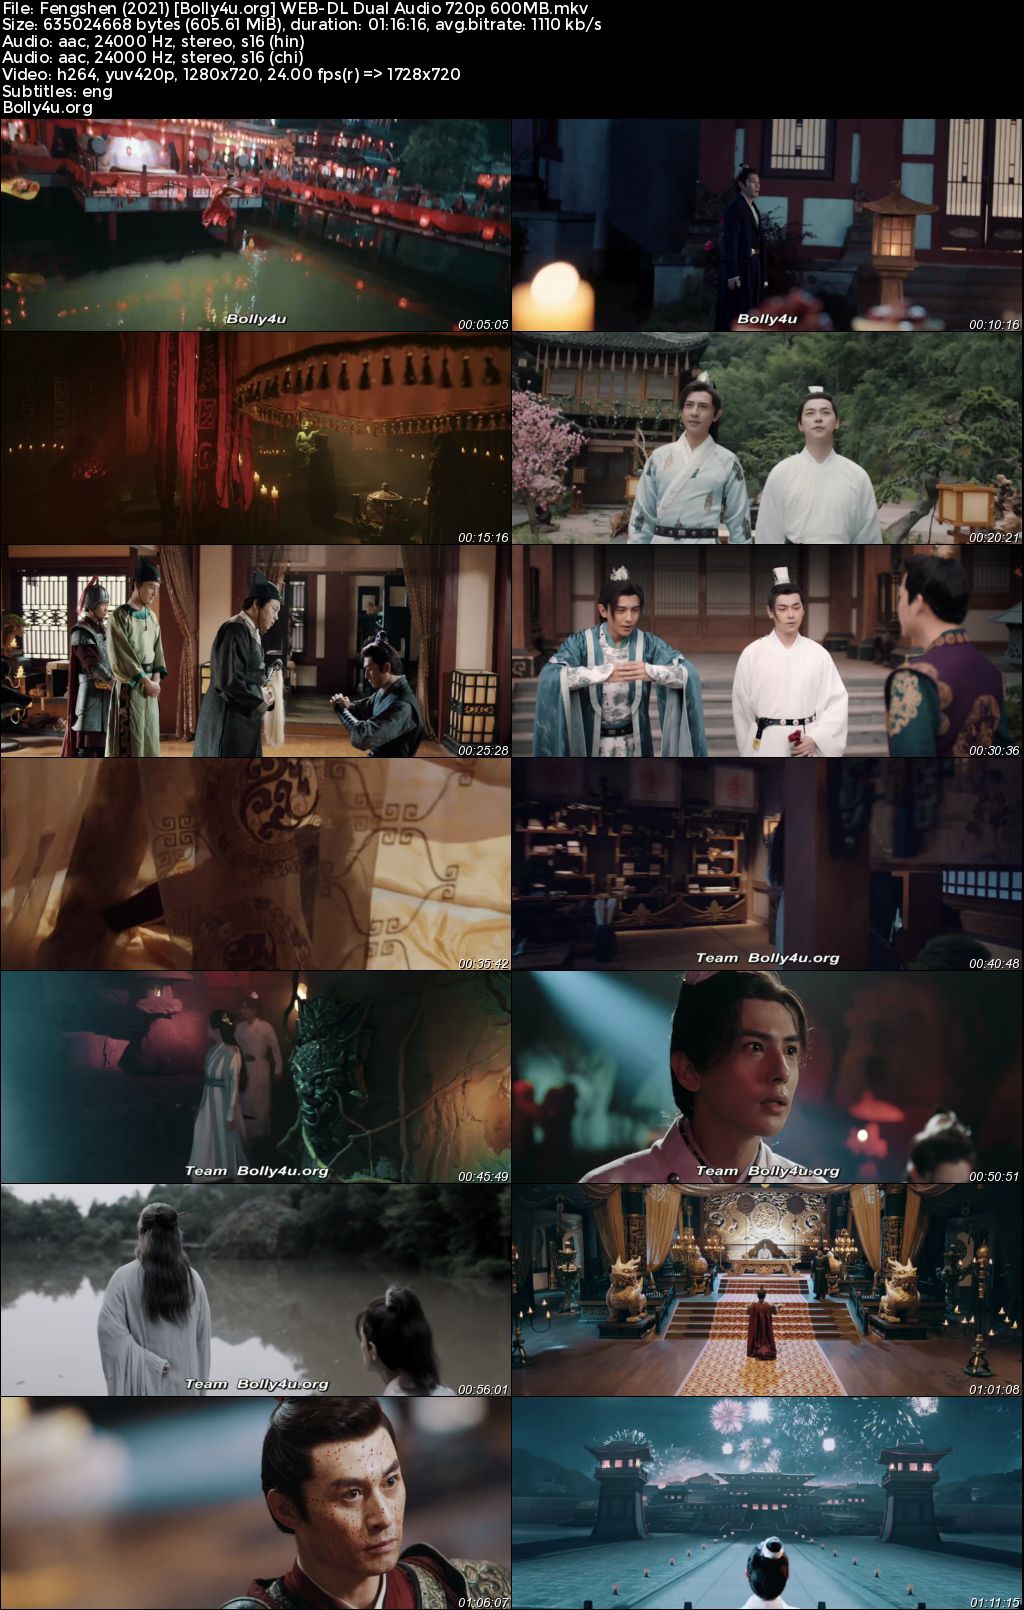 Fengshen 2021 WEB-DL Hindi Dual Audio Full Movie Download 1080p 720p 480p